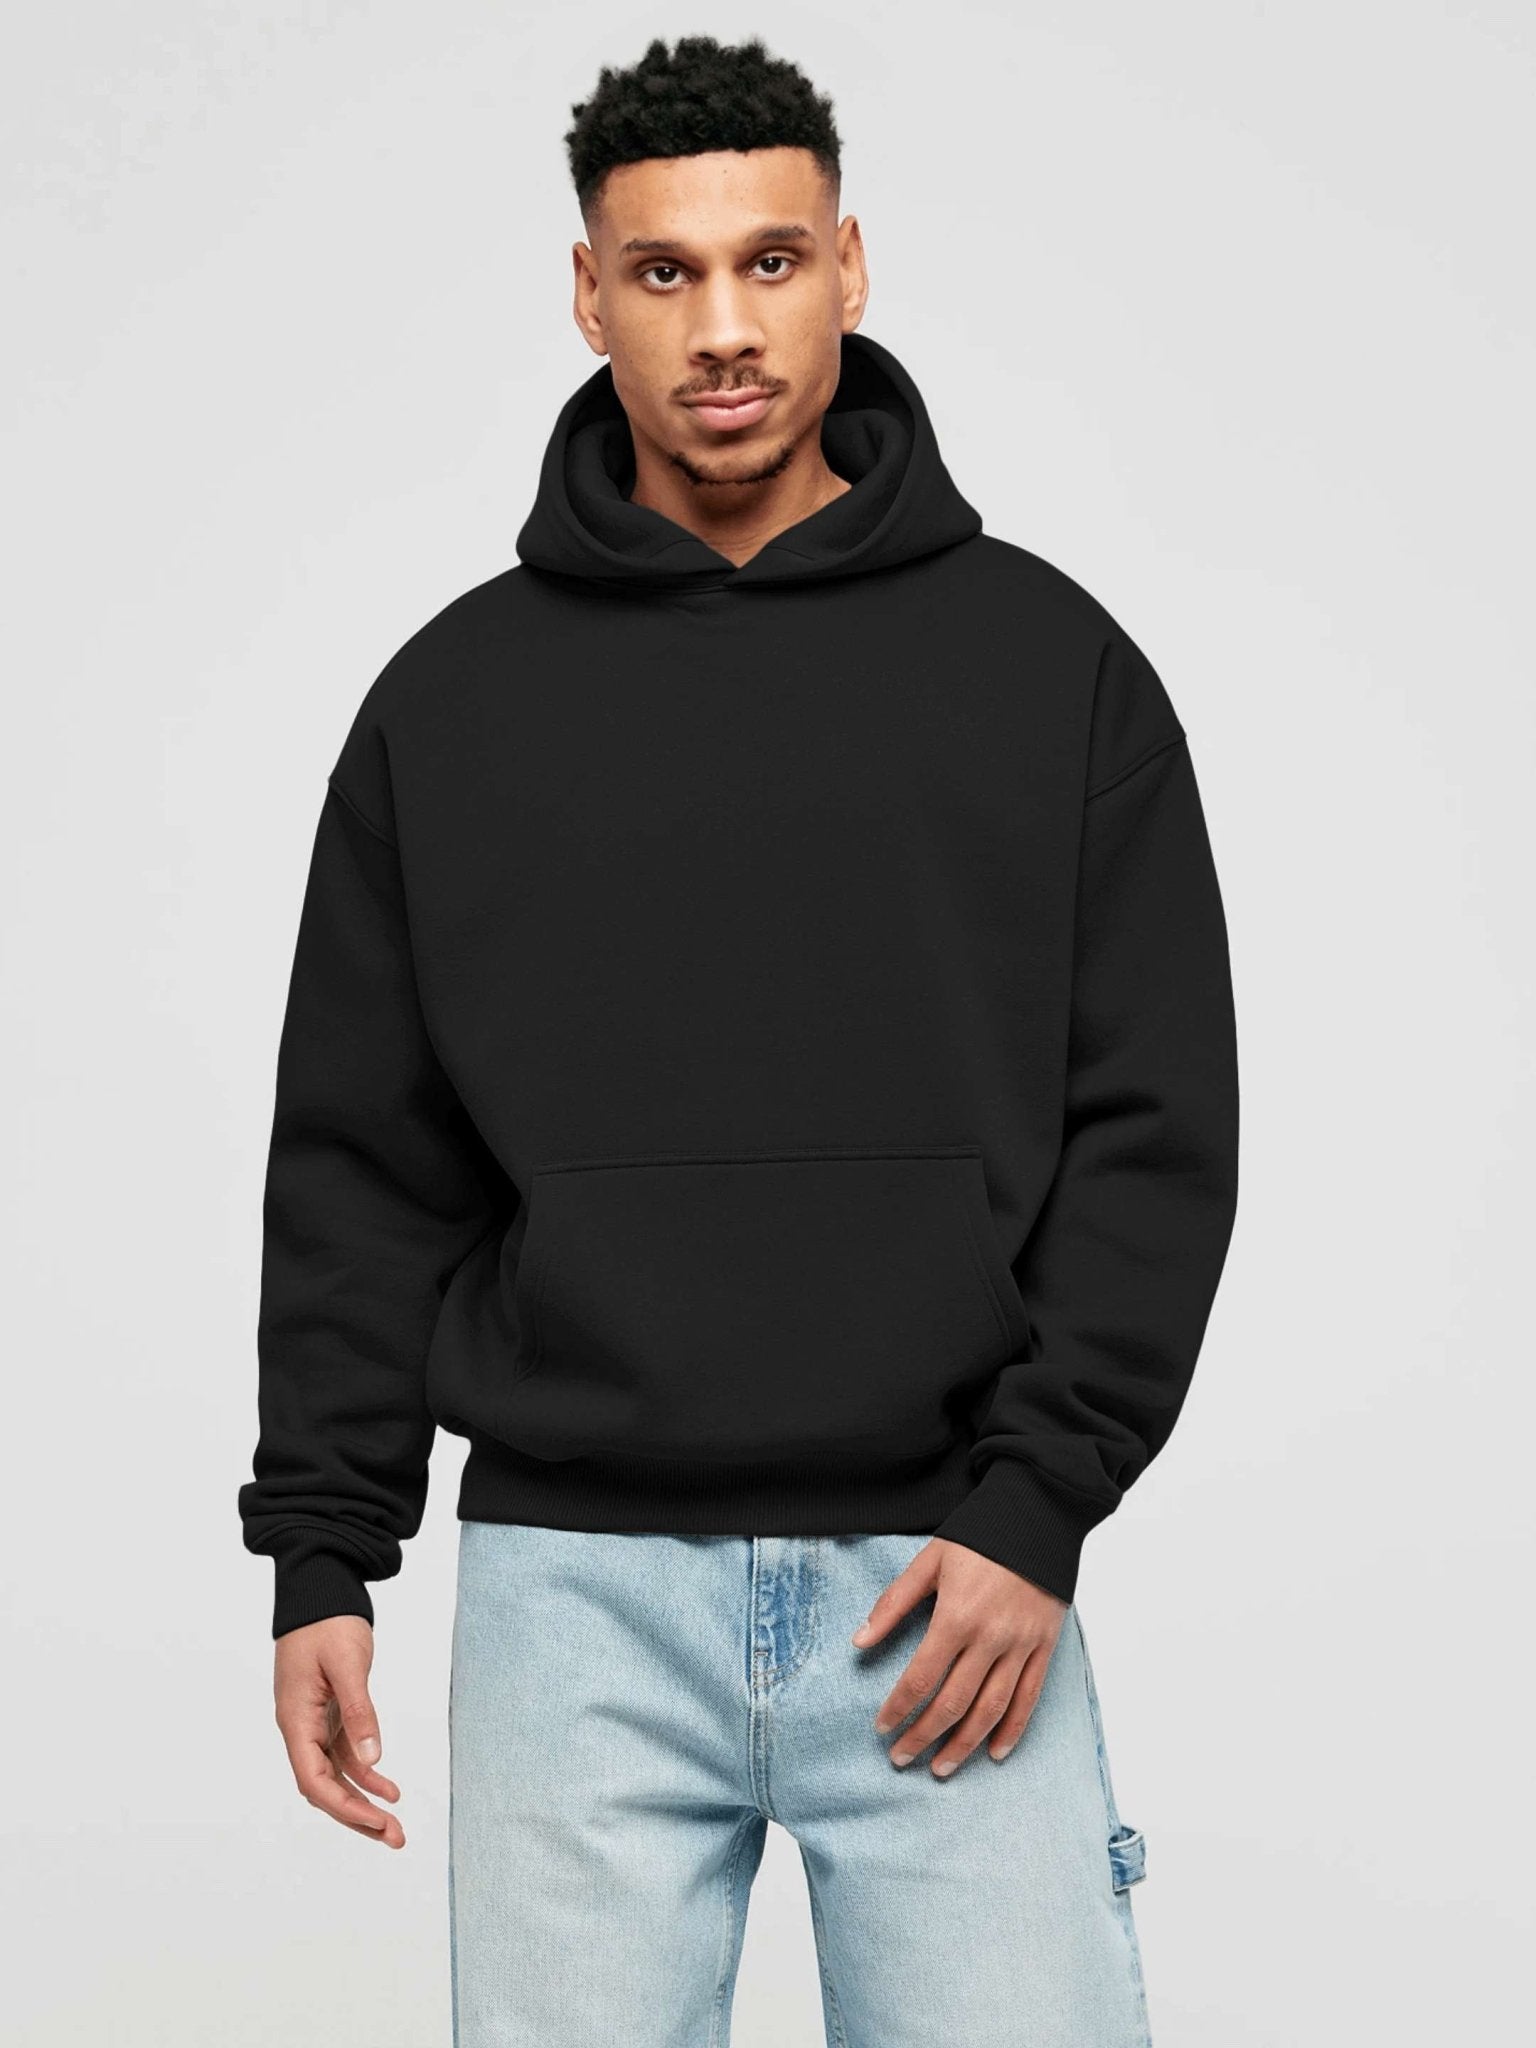 Relaxed Basic Hoodie Heavy Weight